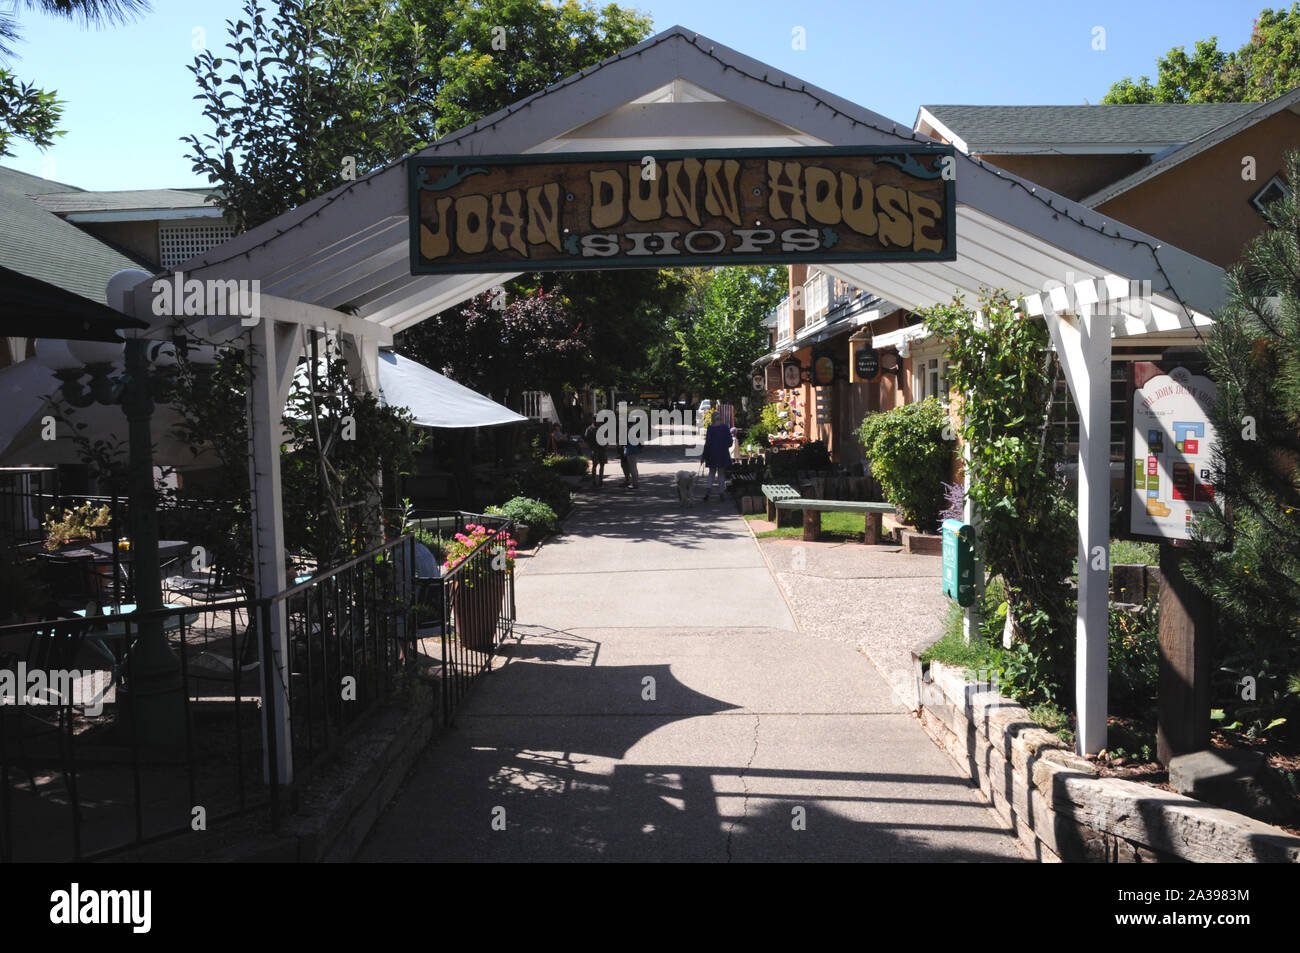 Entrance to the John Dunn shops near the historic plaza in Taos, New Mexico. The shops are named after Long John Dunn, local character and legend.. Stock Photo